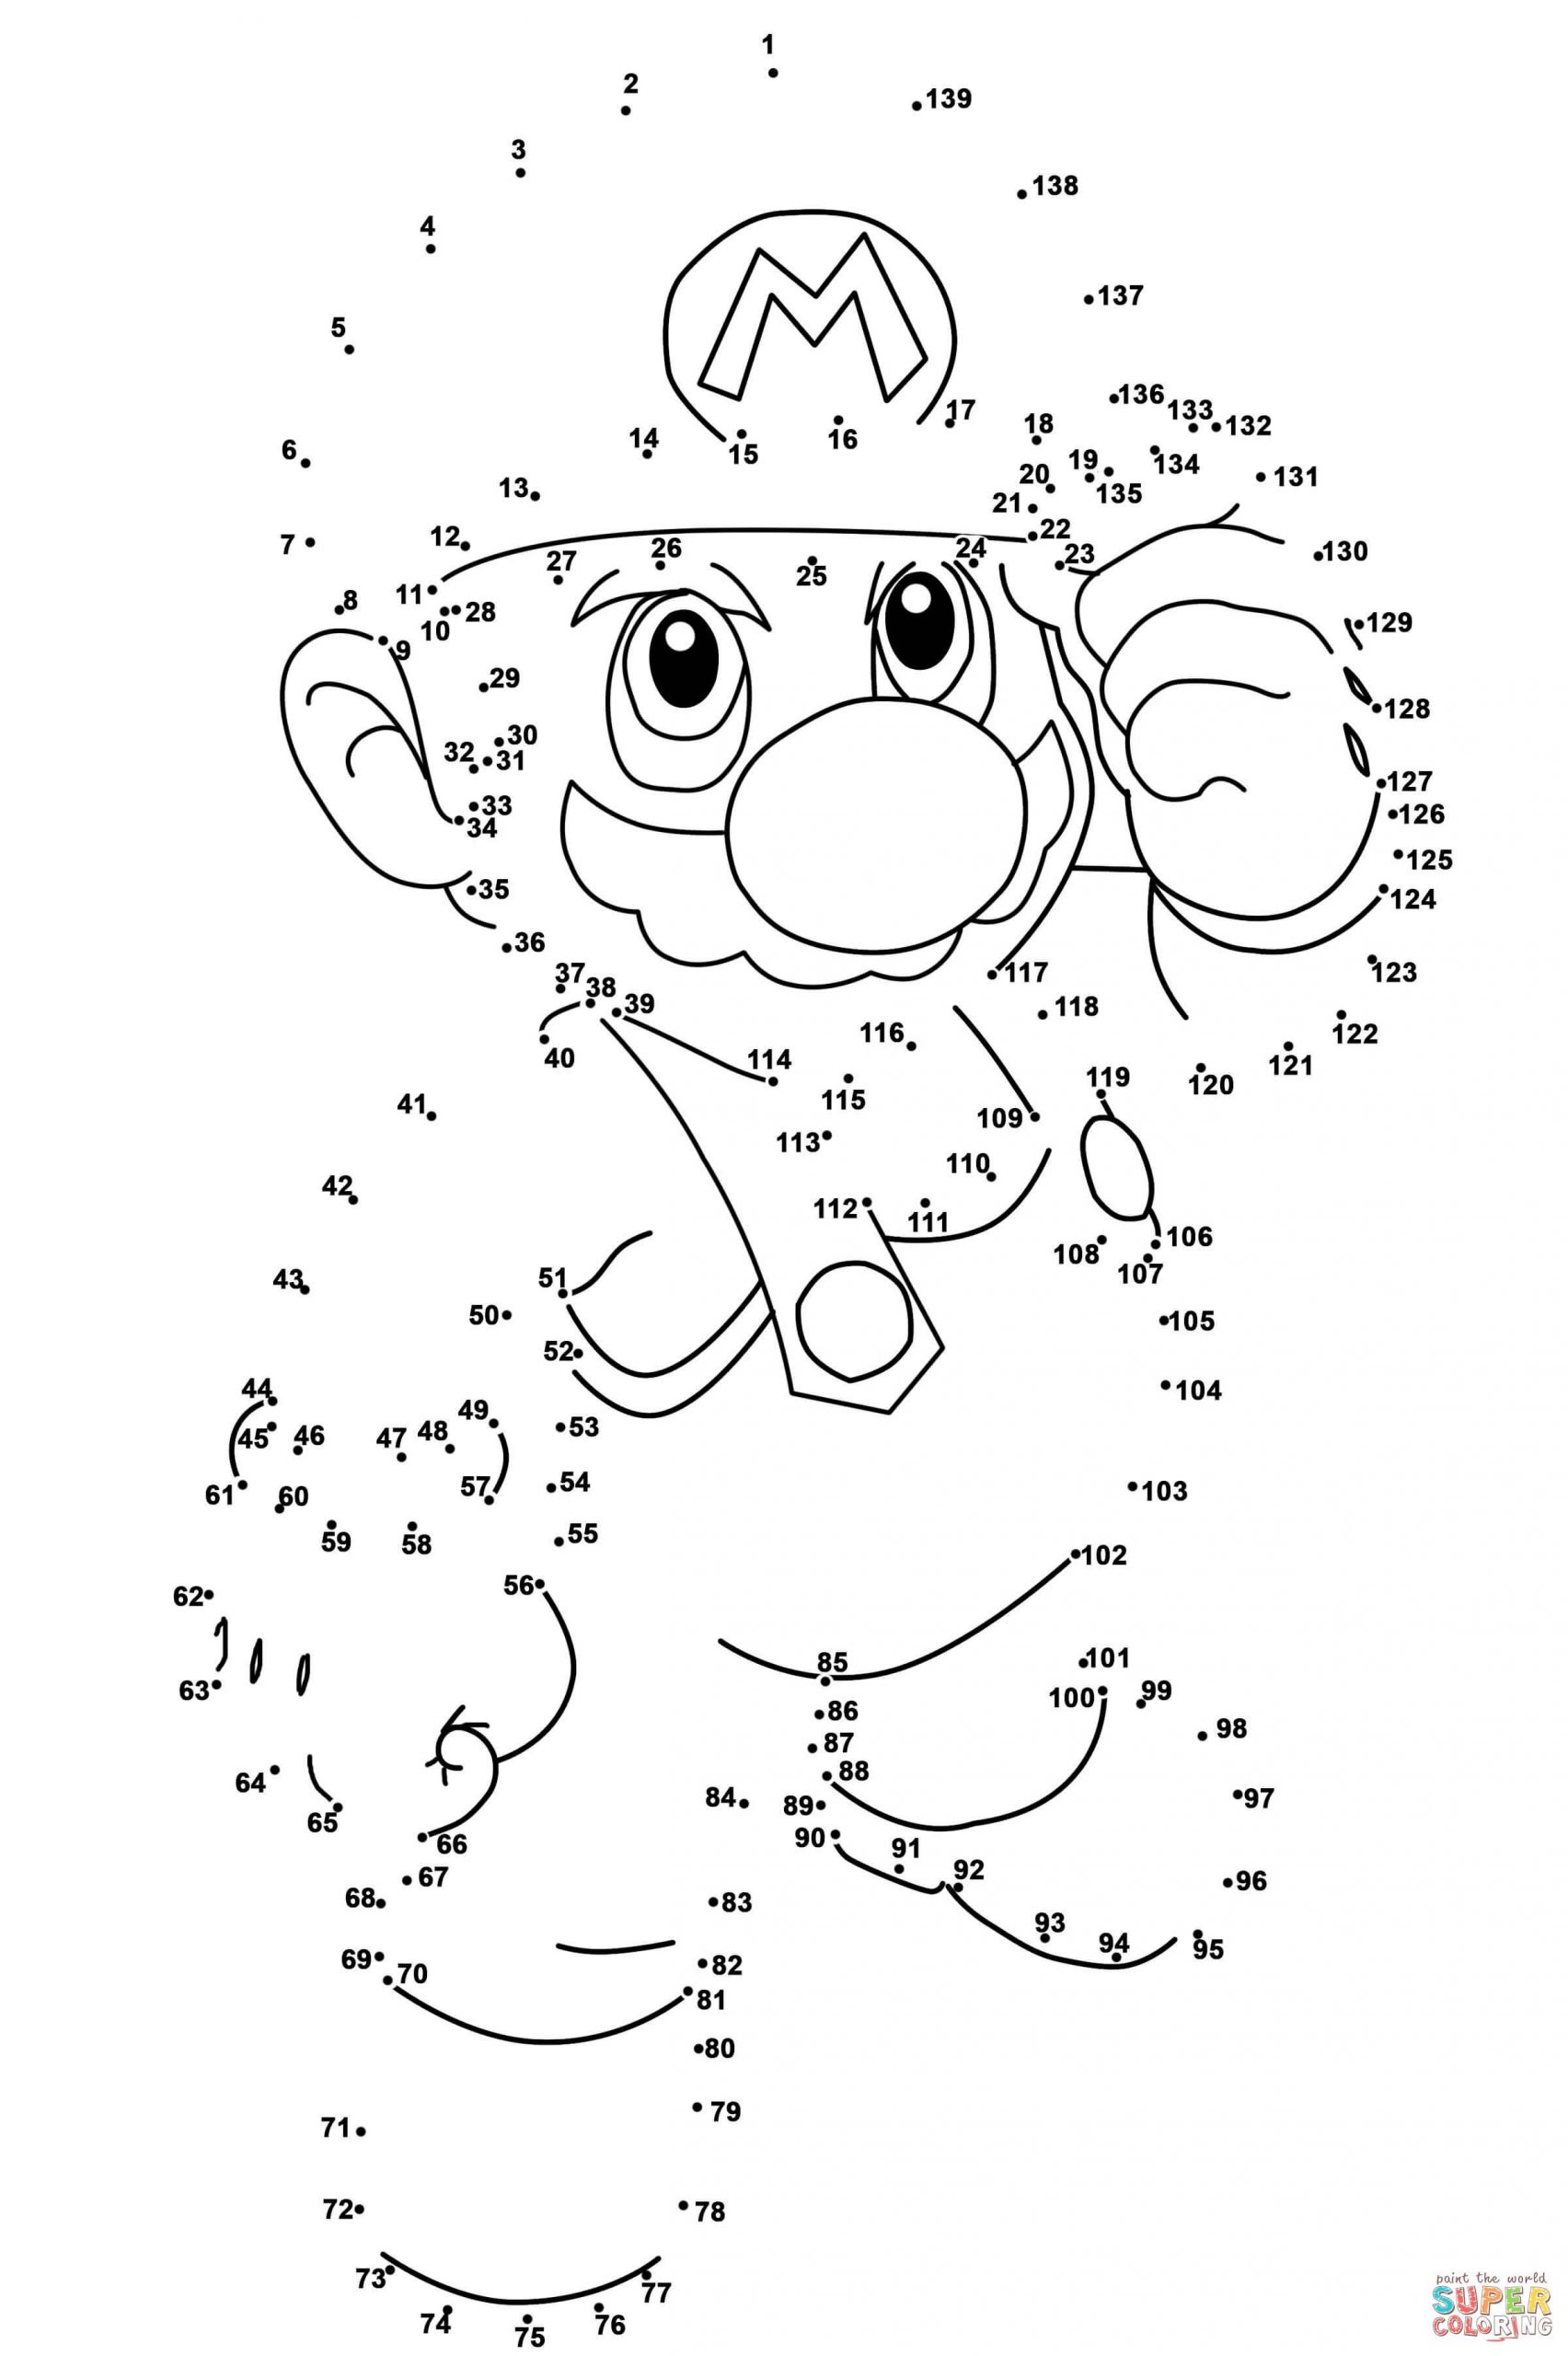 coloring page for kids ~ Coloring Page For Kids Dot To Pages ...